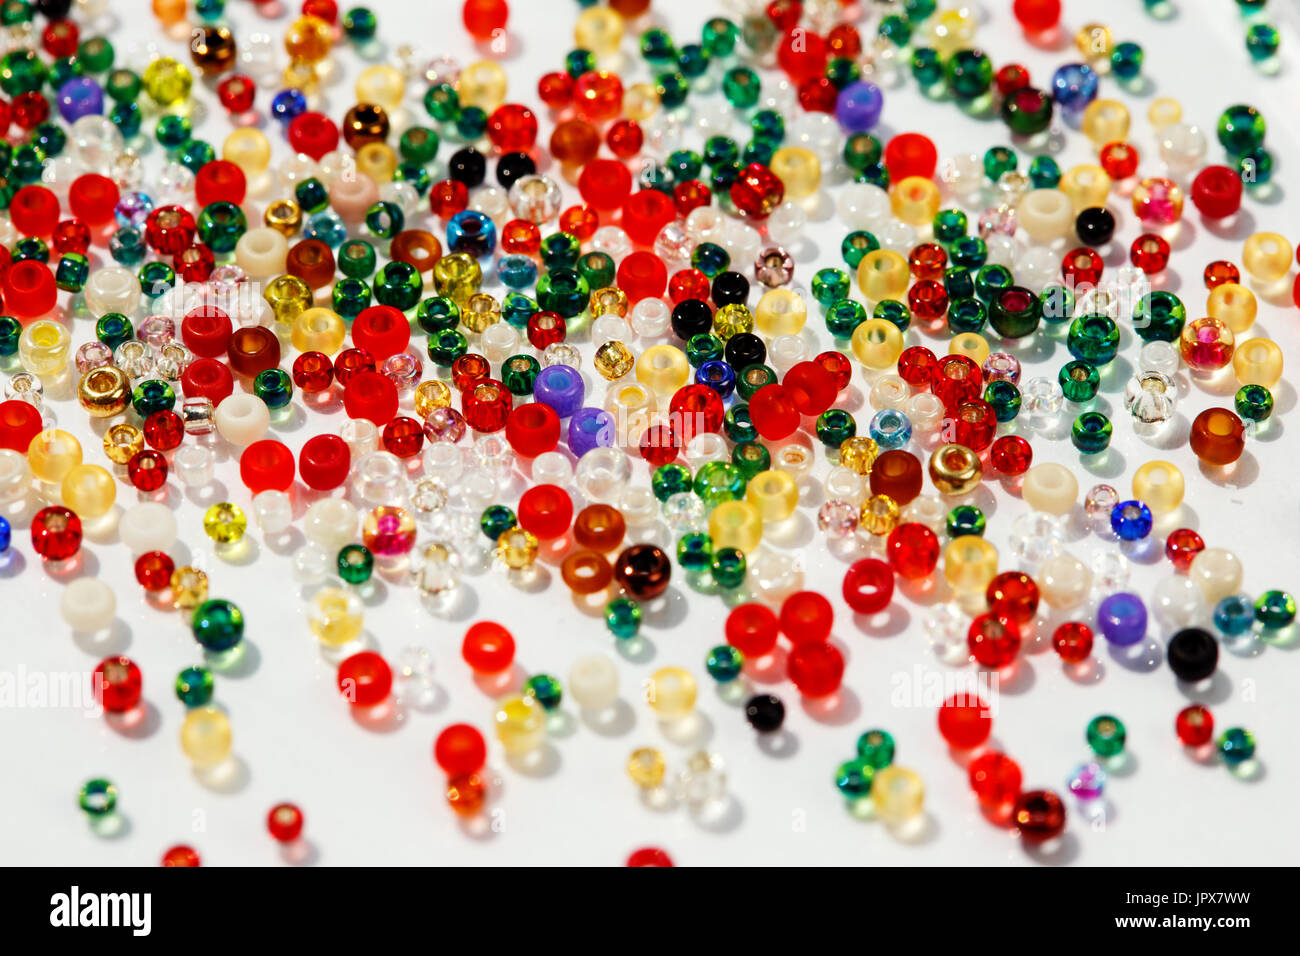 Colorful glass beads on white background, close up photo. Stock Photo